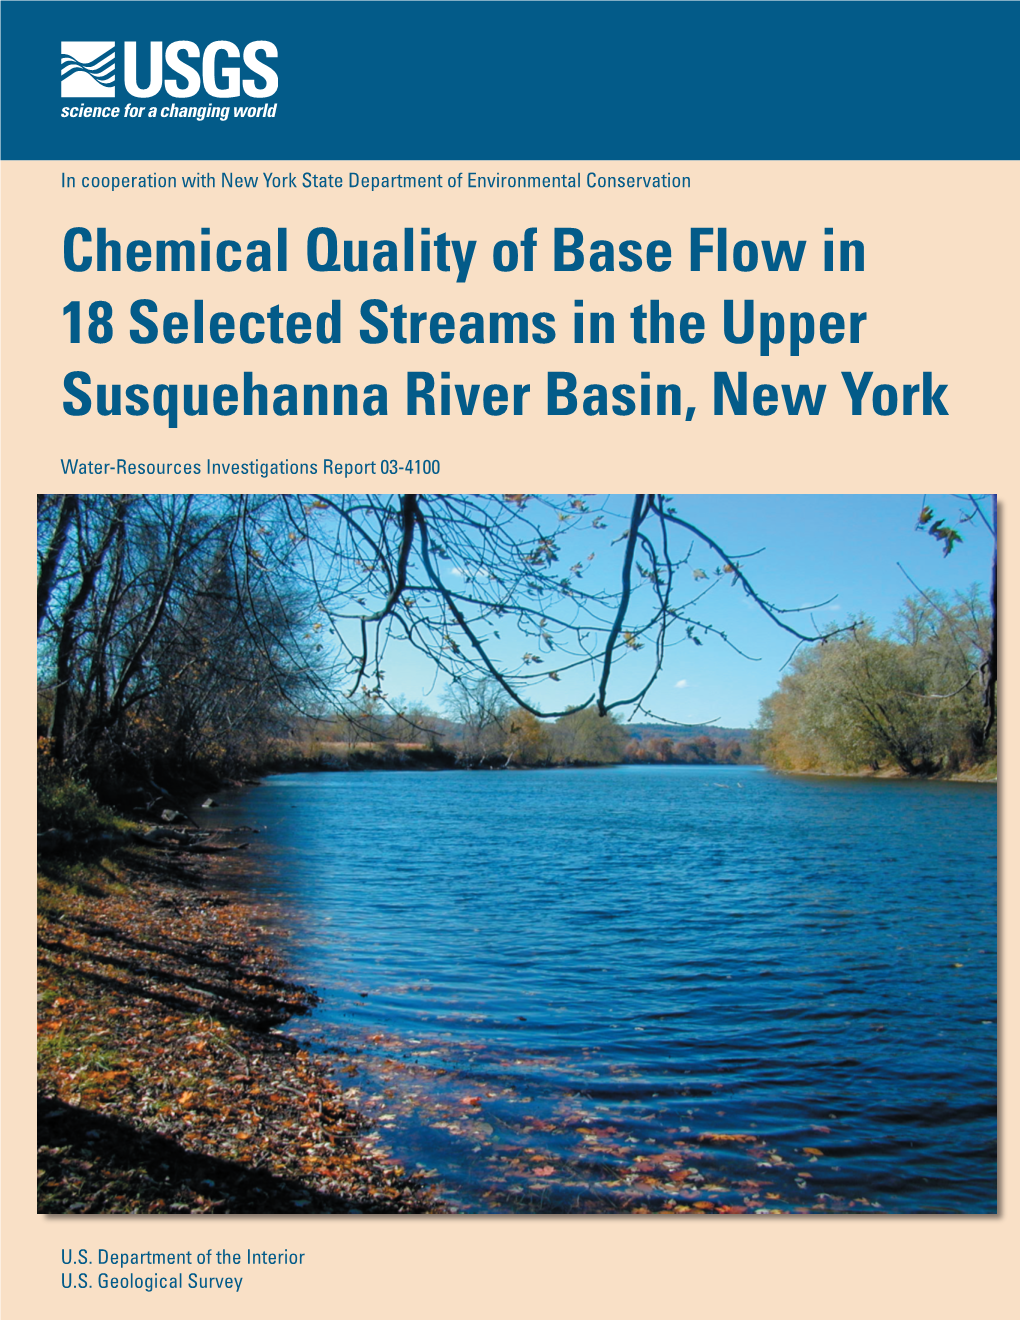 Chemical Quality of Base Flow in 18 Selected Streams in the Upper Susquehanna River Basin, New York